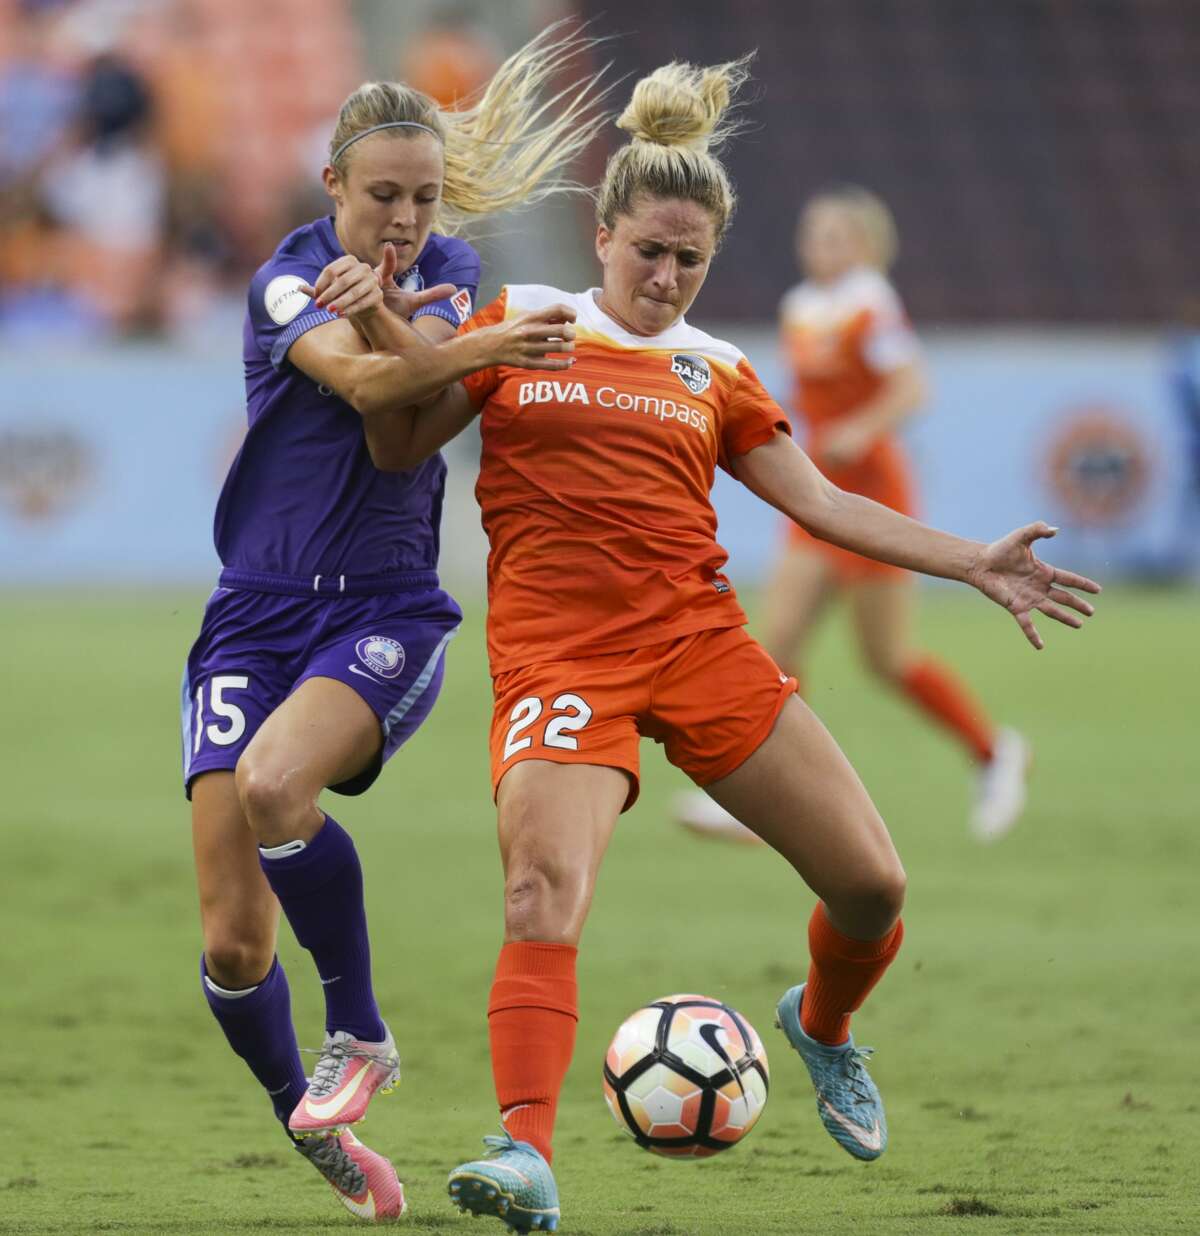 Houston Dash defender Camille Levin (22) defensing Orlando Pride forward Rachel Hill (15) during the first half of the game at BBVA Compass Stadium Saturday, June 17, 2017, in Houston. ( Yi-Chin Lee / Houston Chronicle )